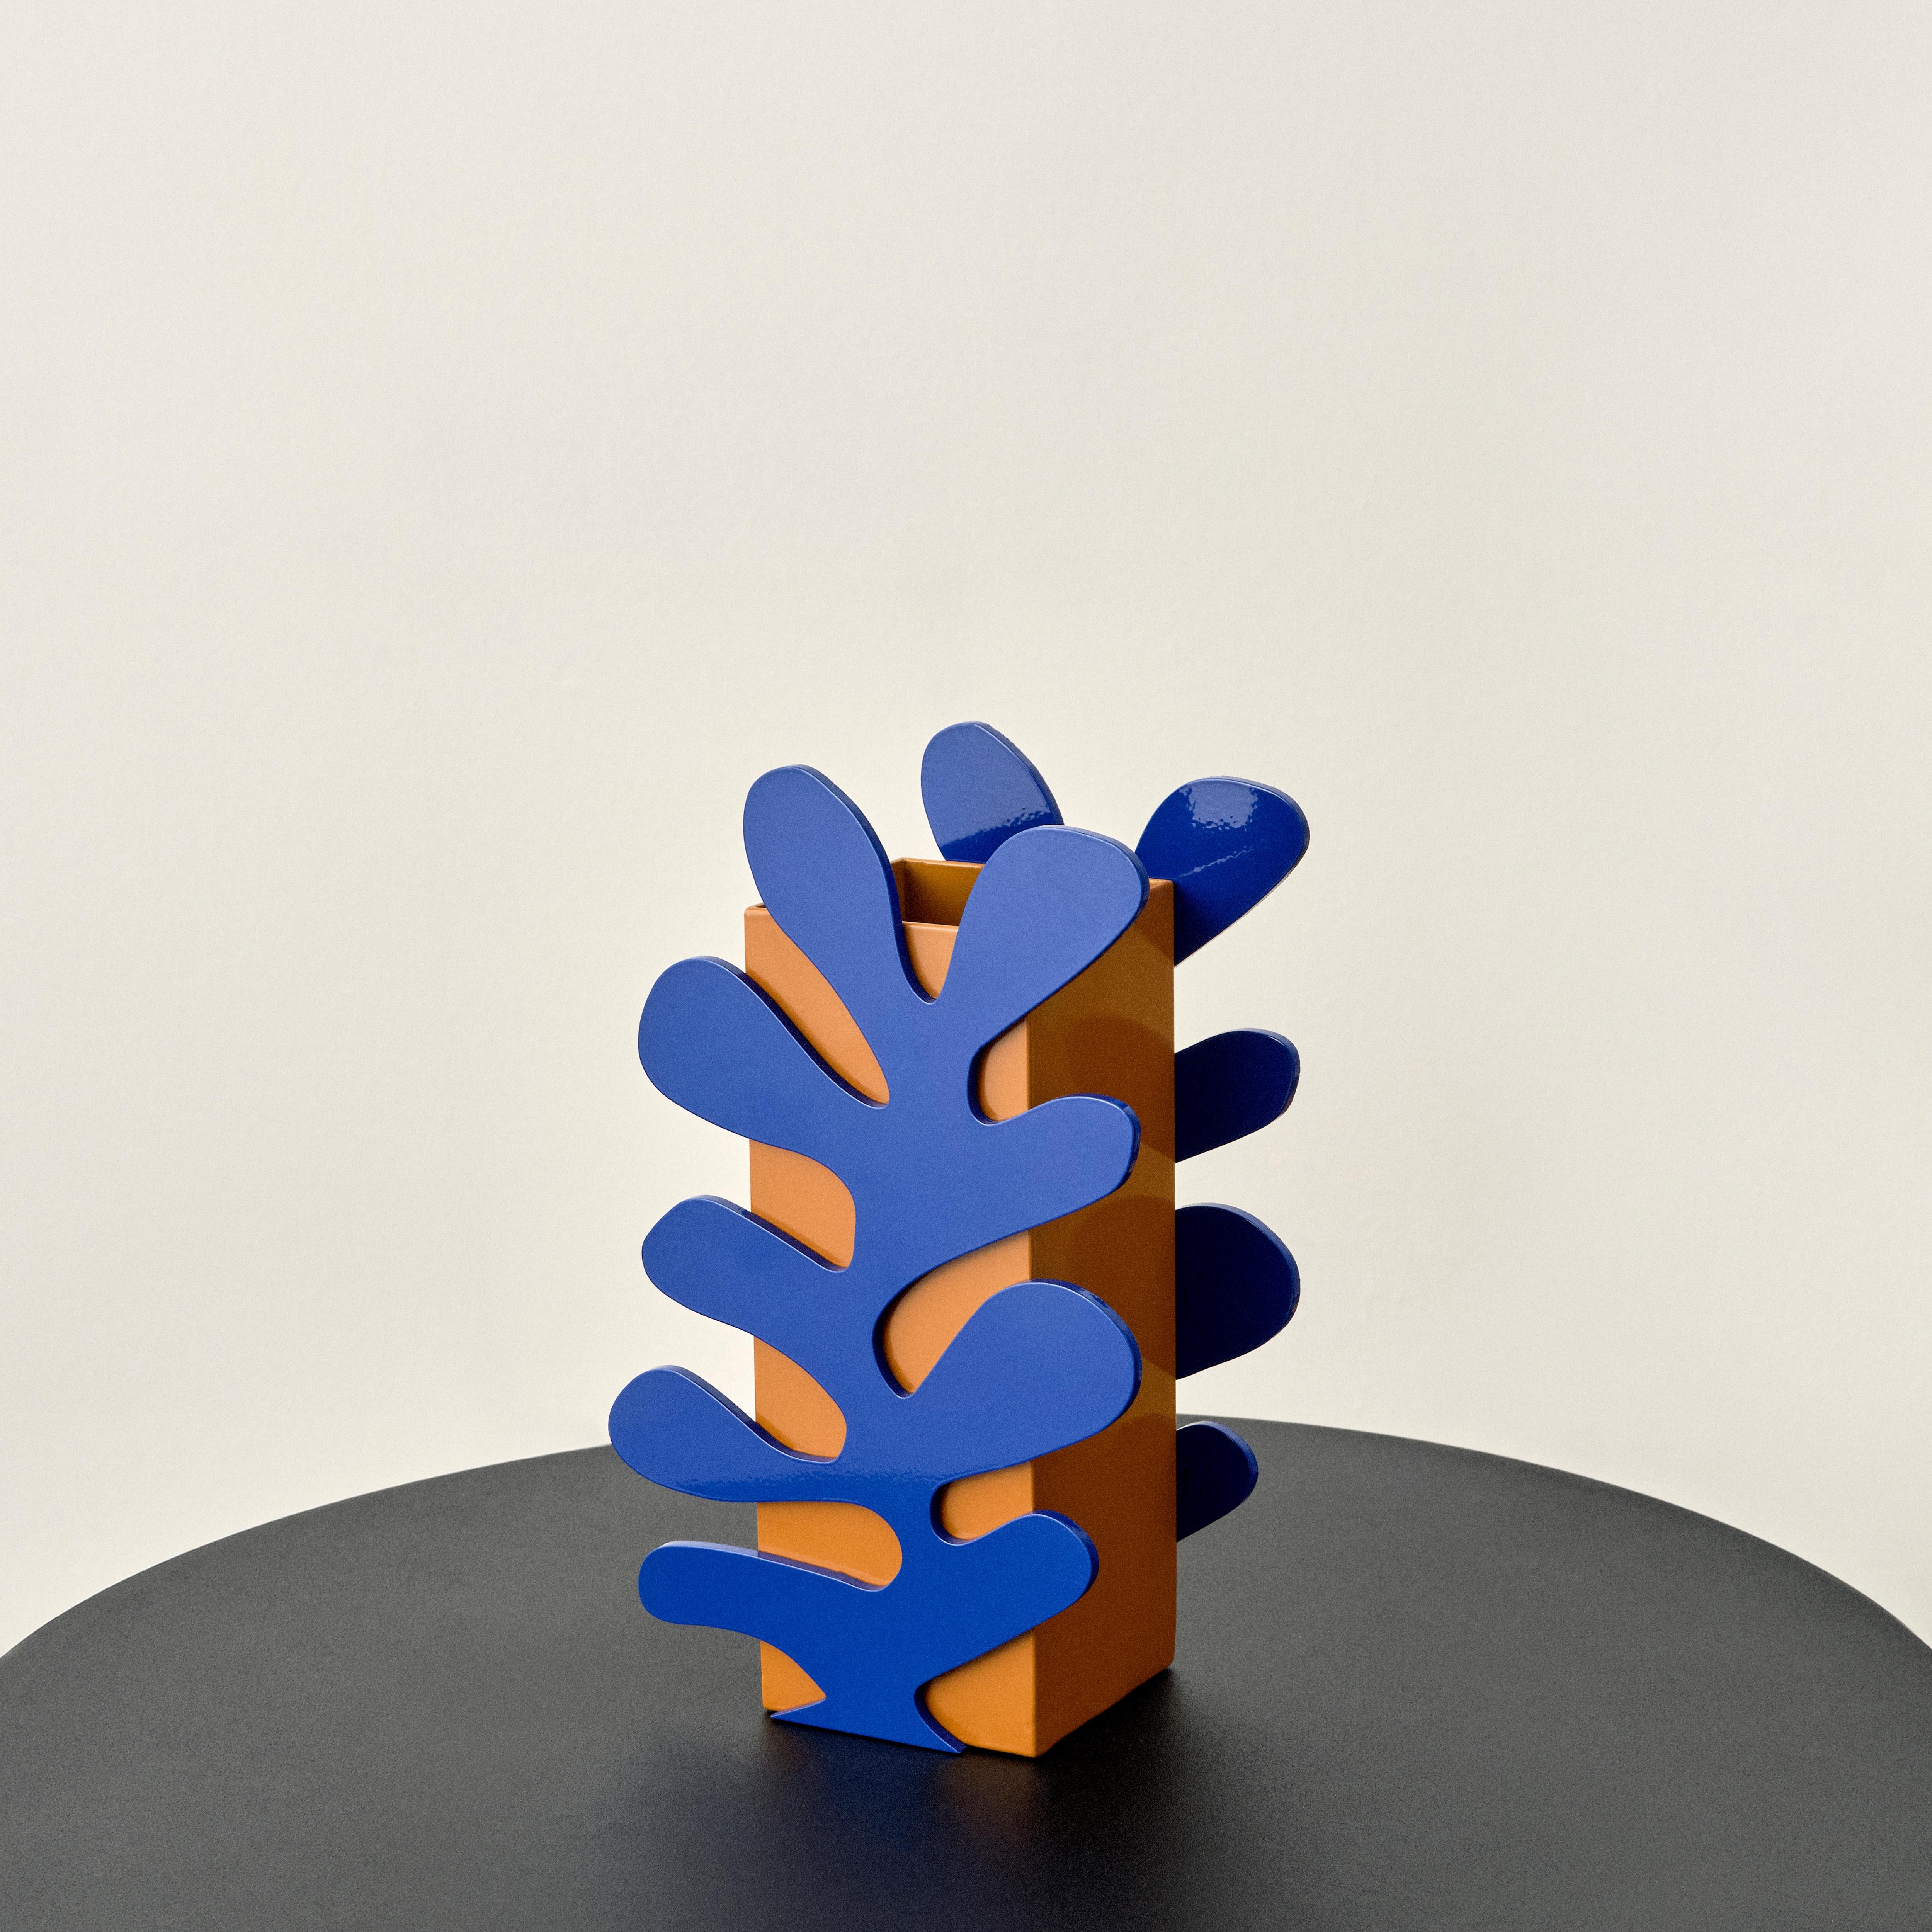 Animate Object's vase collection takes inspiration from the merging of abstract cut-out shapes and forms to create unique decorative pieces. The Coral Vase, with its Matisse-inspired design, embodies the fluidity and movement of the ocean. The